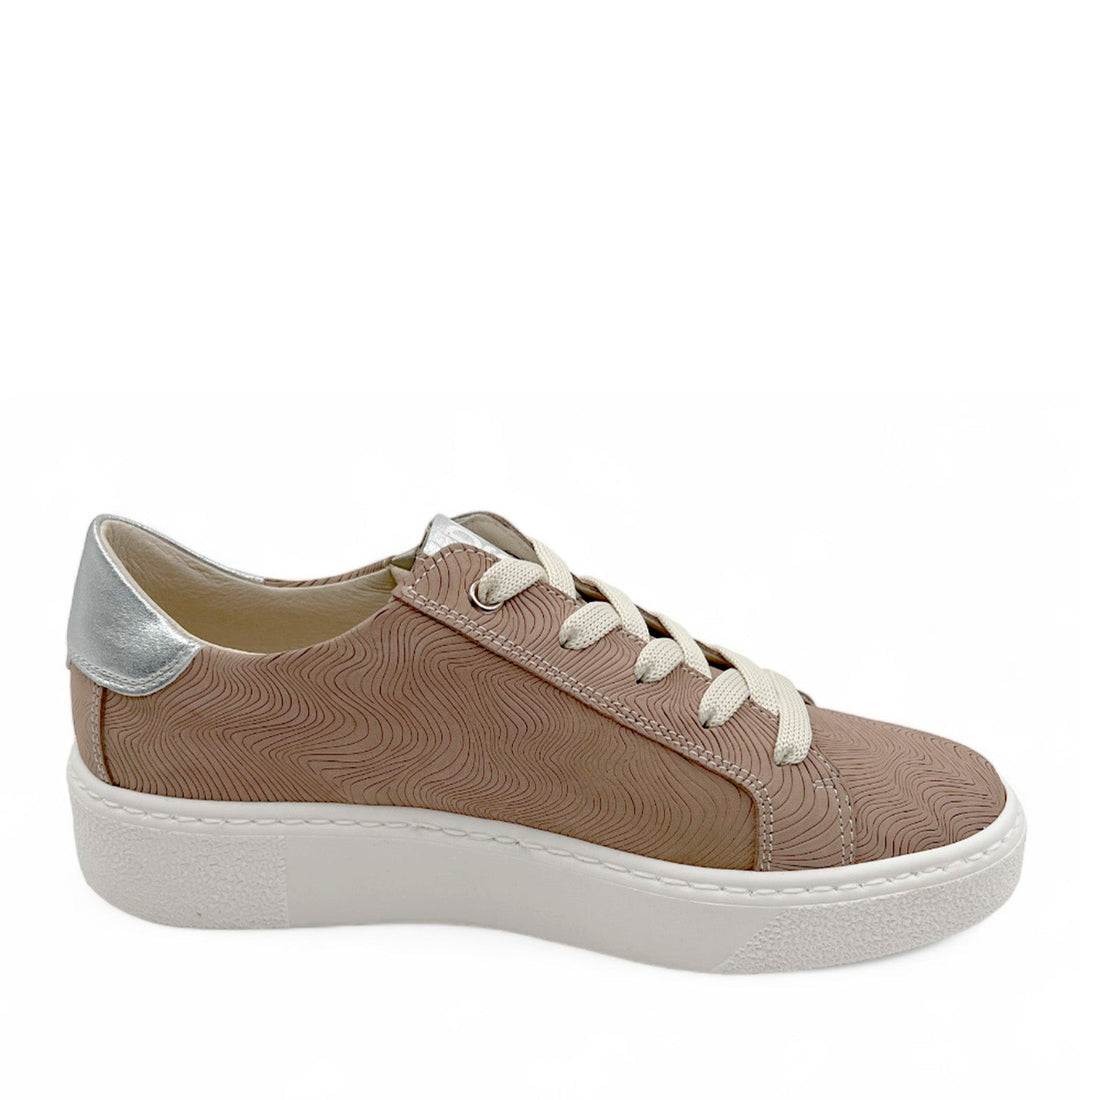 DL Sport 6208 Taupe